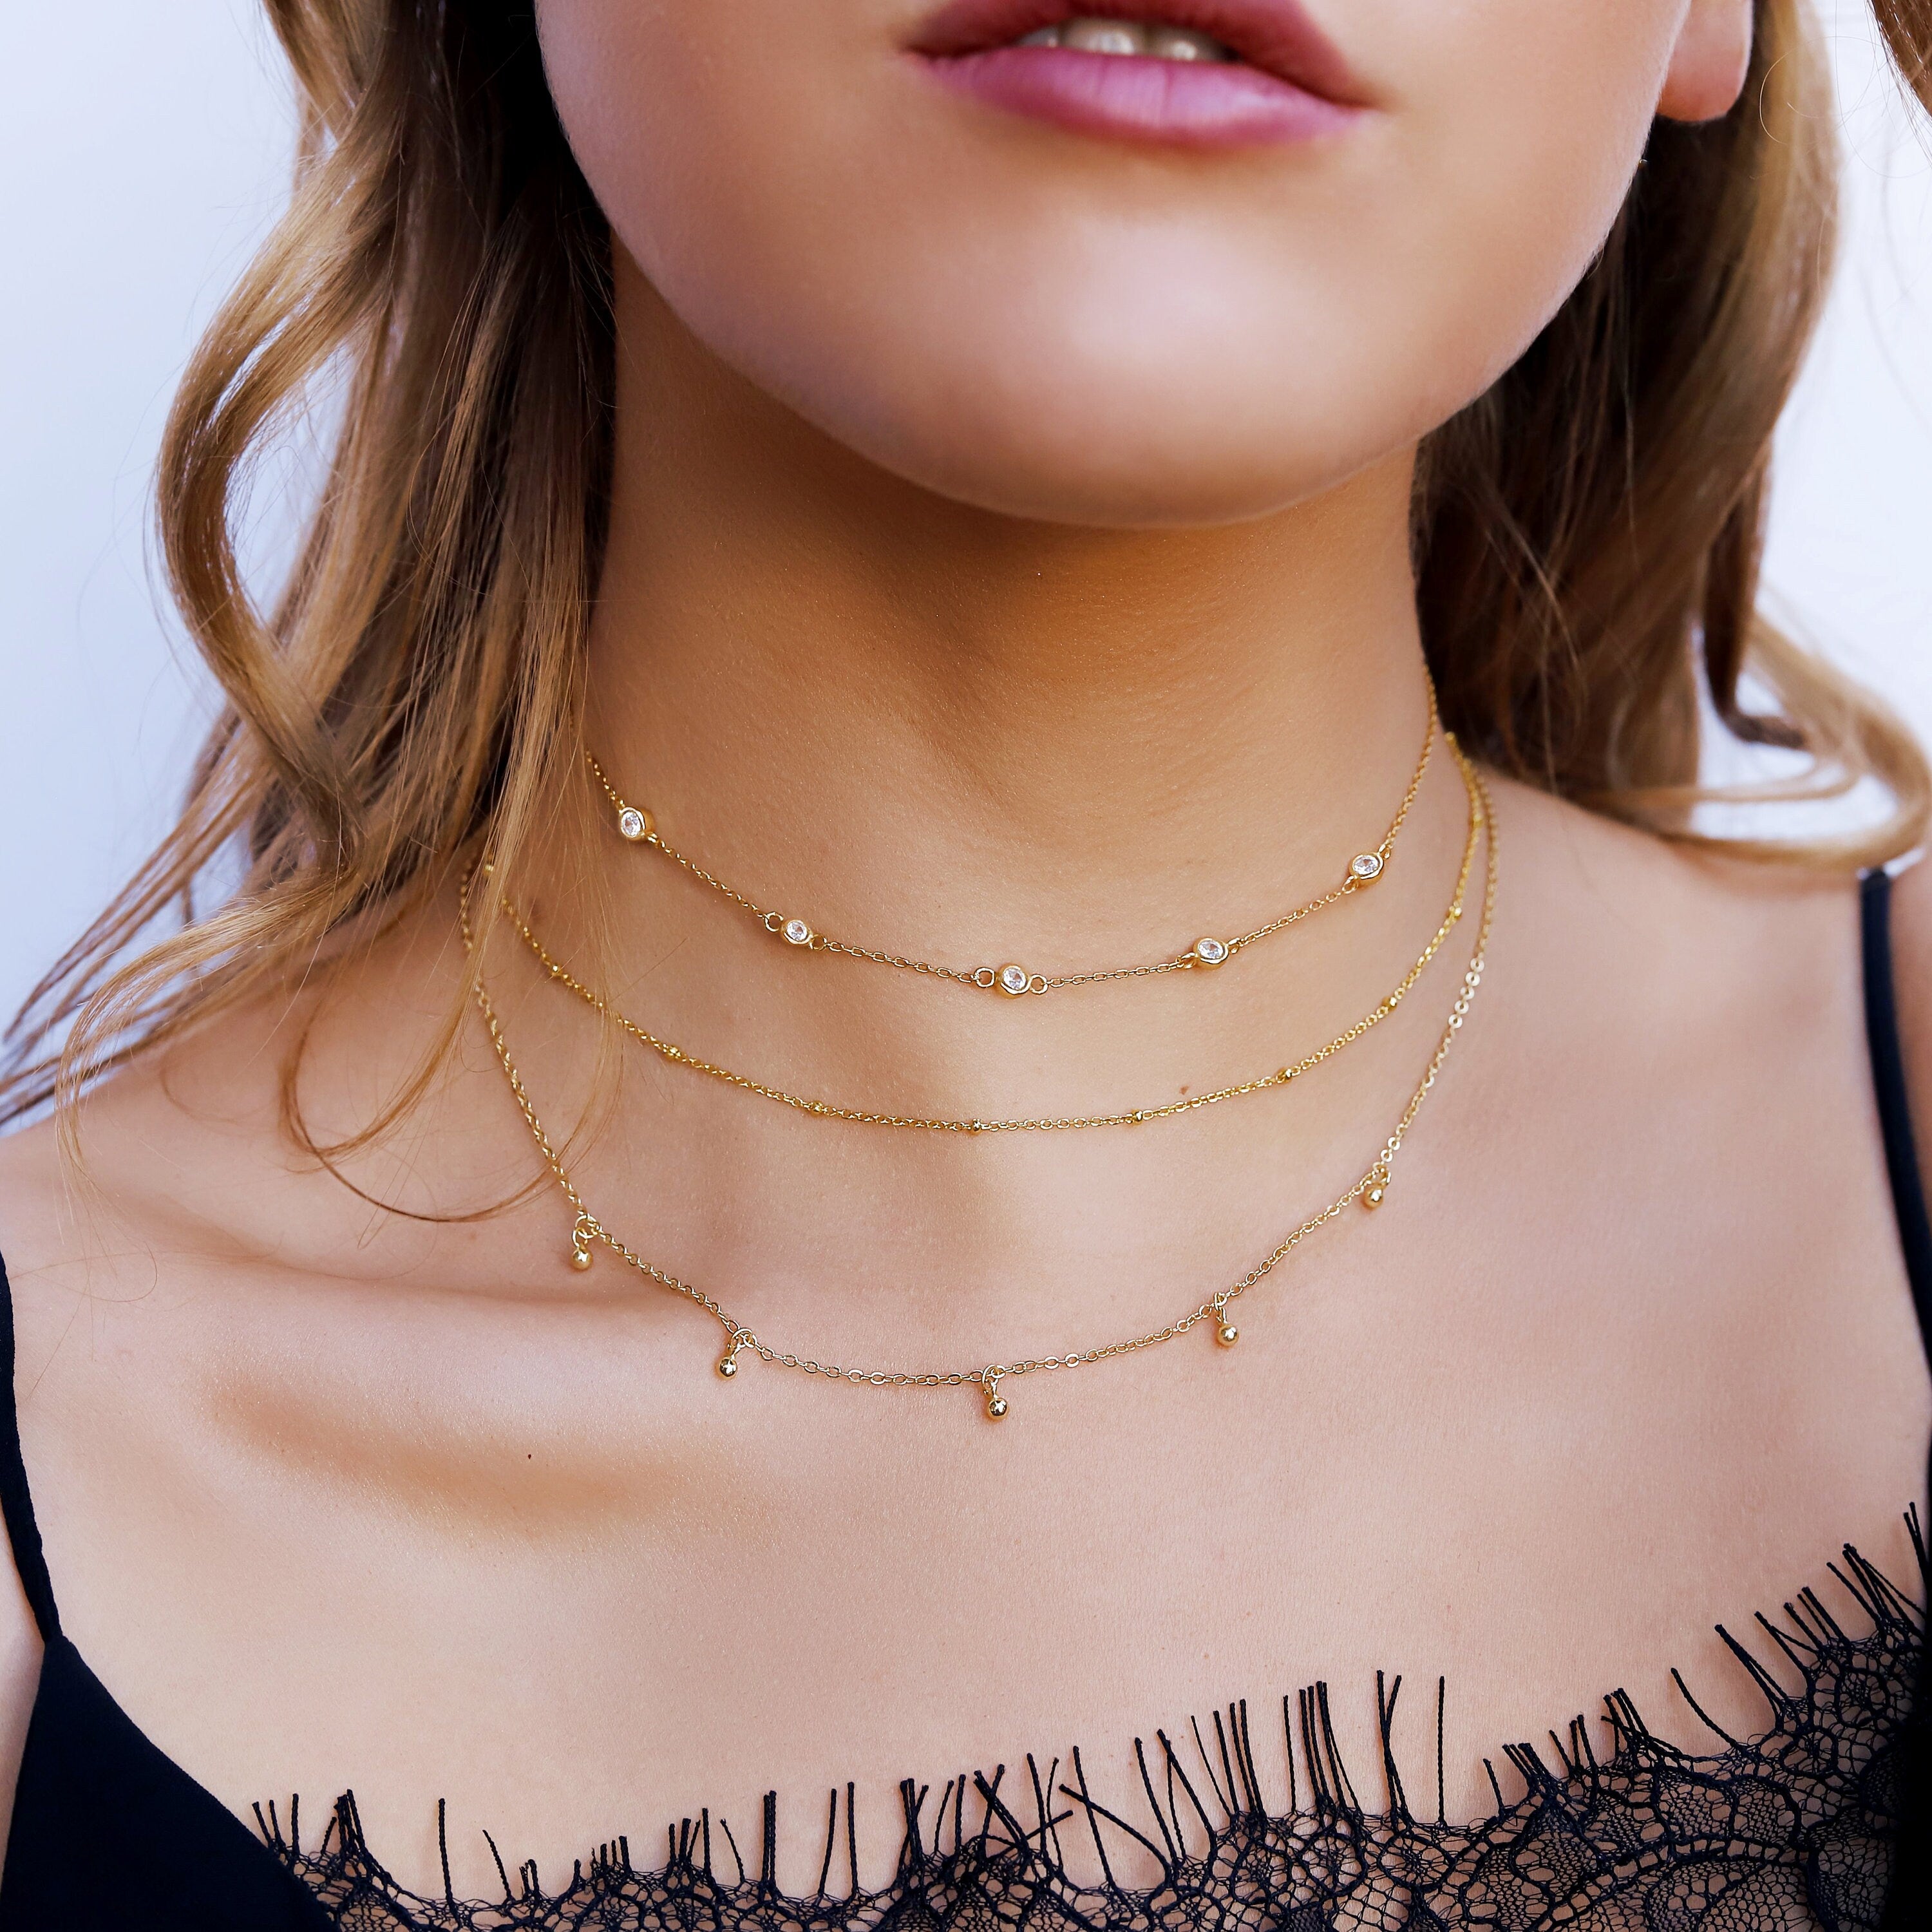 Beck - Dainty Gold Layering Necklace, 925 Sterling Silver 18K Gold plated, dainty beaded necklace